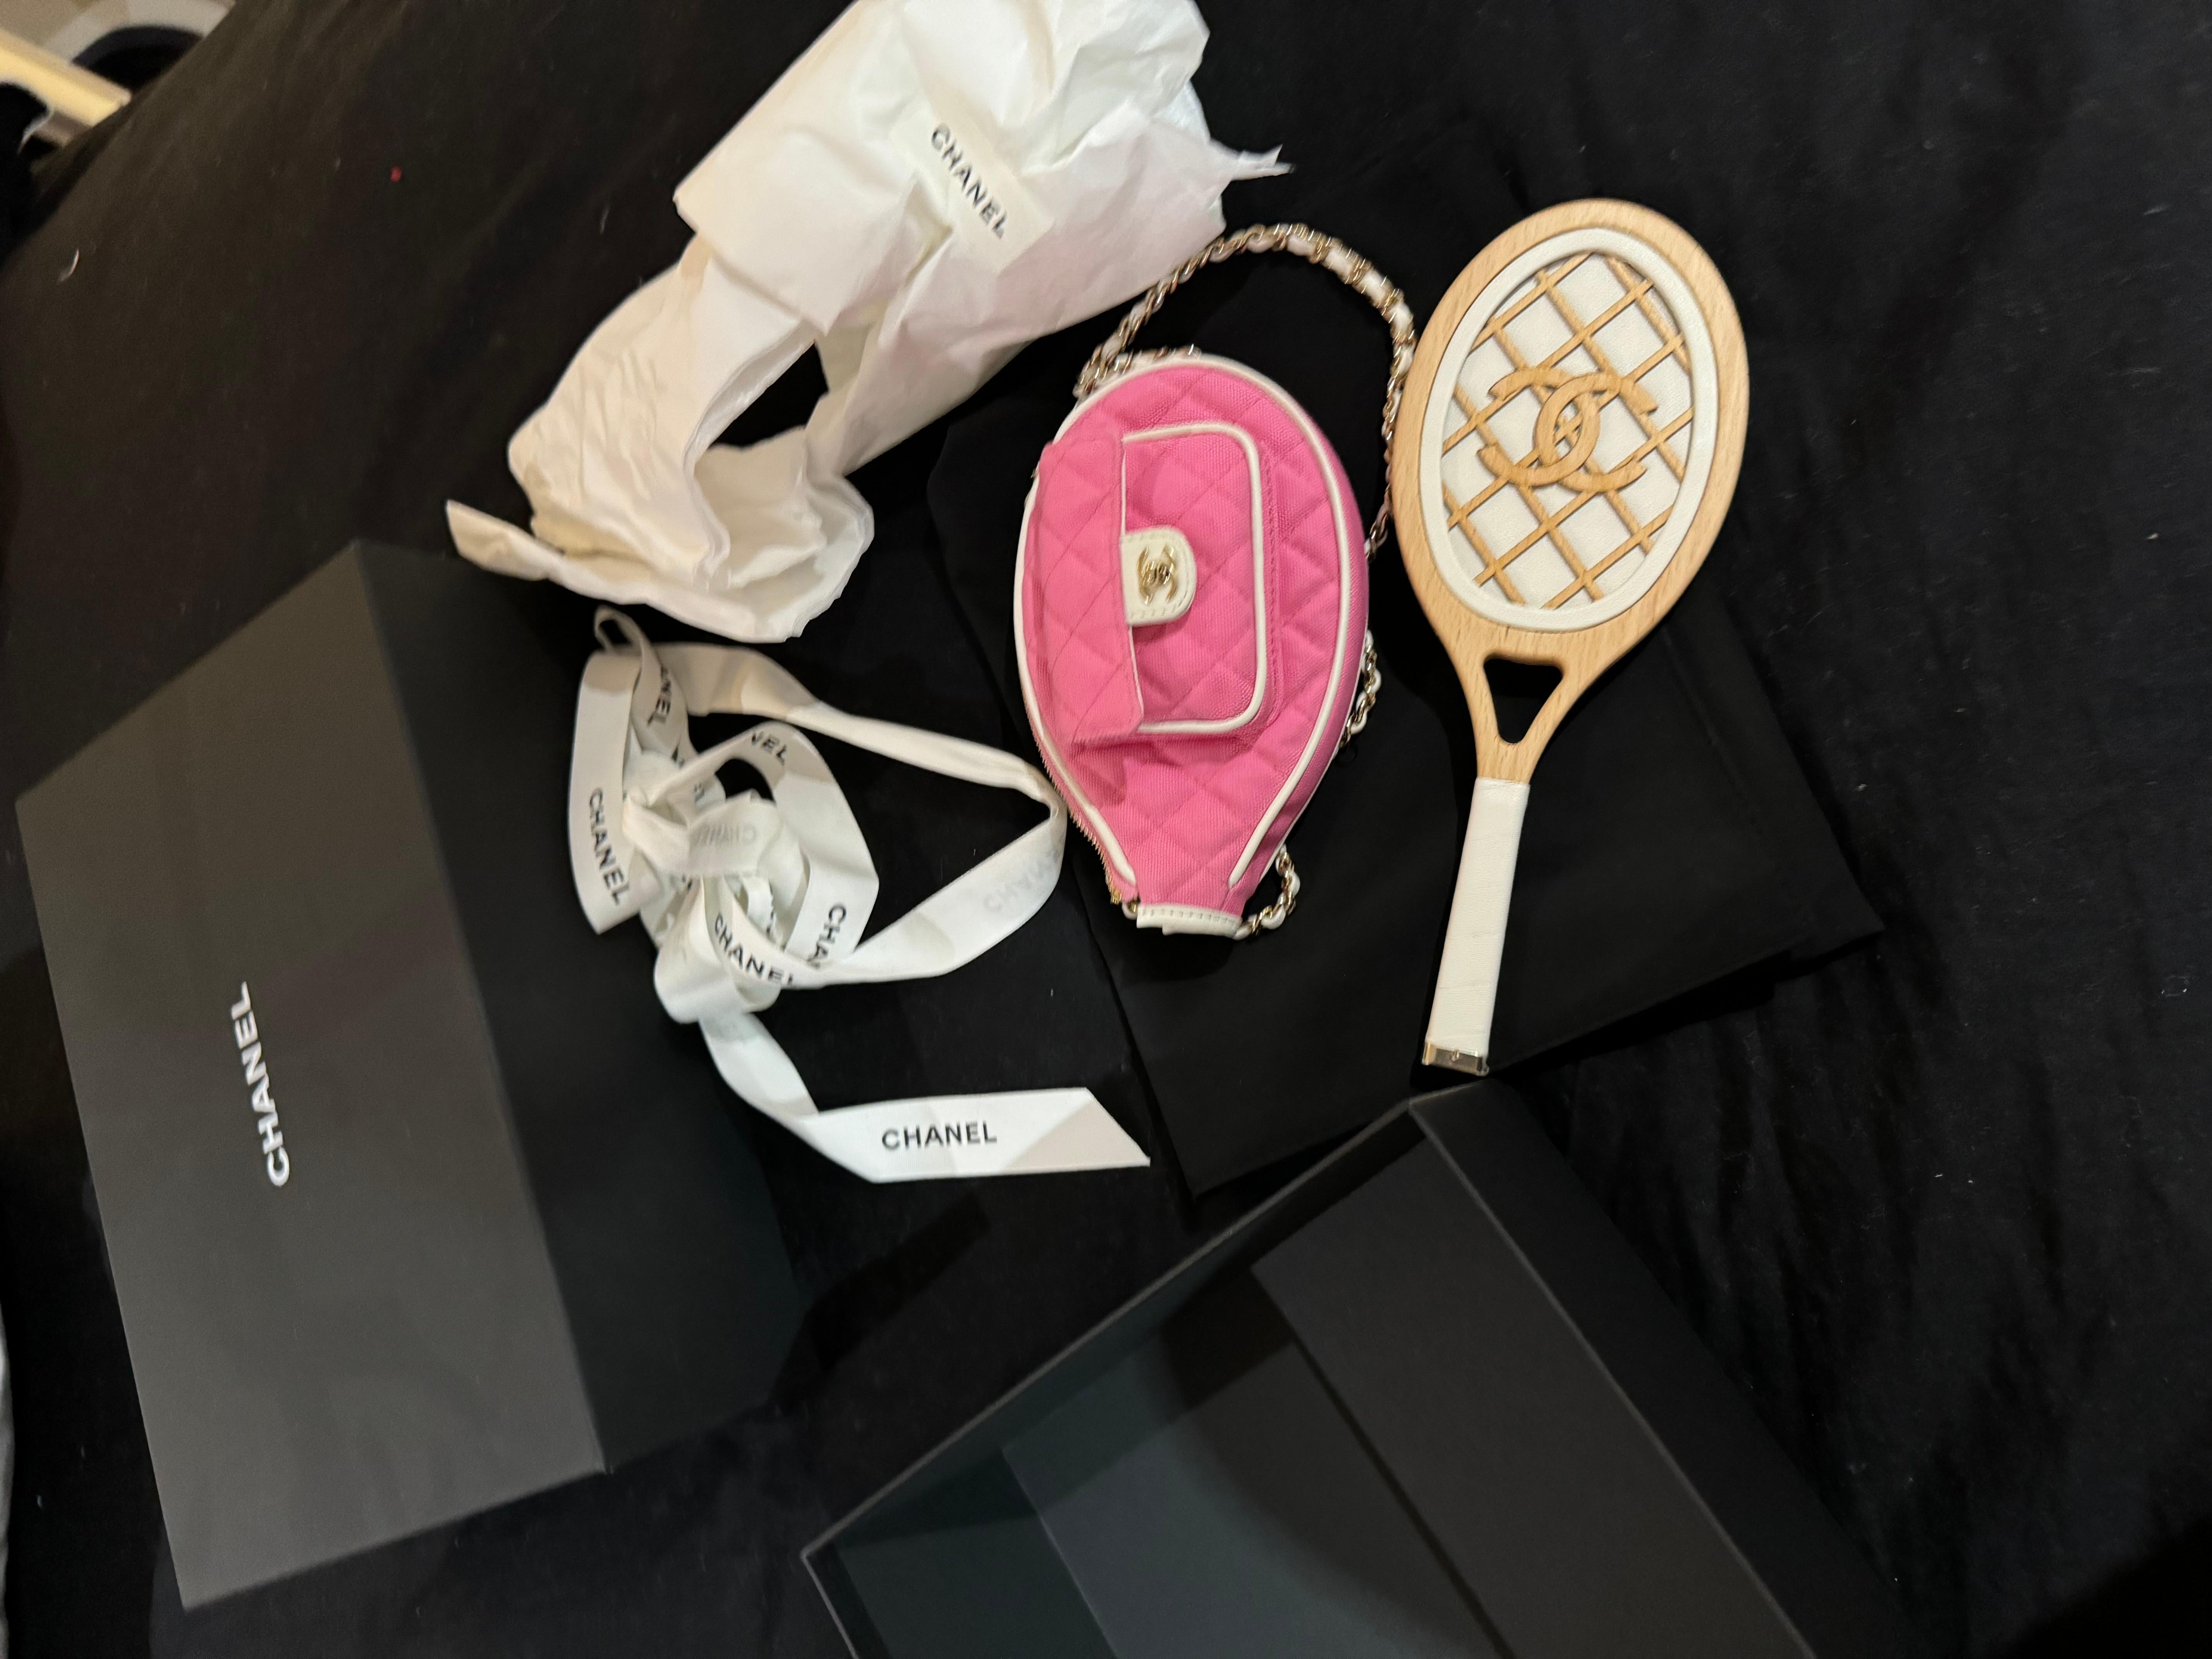 Chanel Tennis bag Barbie Pink and White  Racket Mirror Handbag Bag 23c Runway: A very rare runway collectors piece

Chanel pink canvas fabric with gold tone metal. White leather trims Bag is shaped like a tennis racquet. When you open it there is a